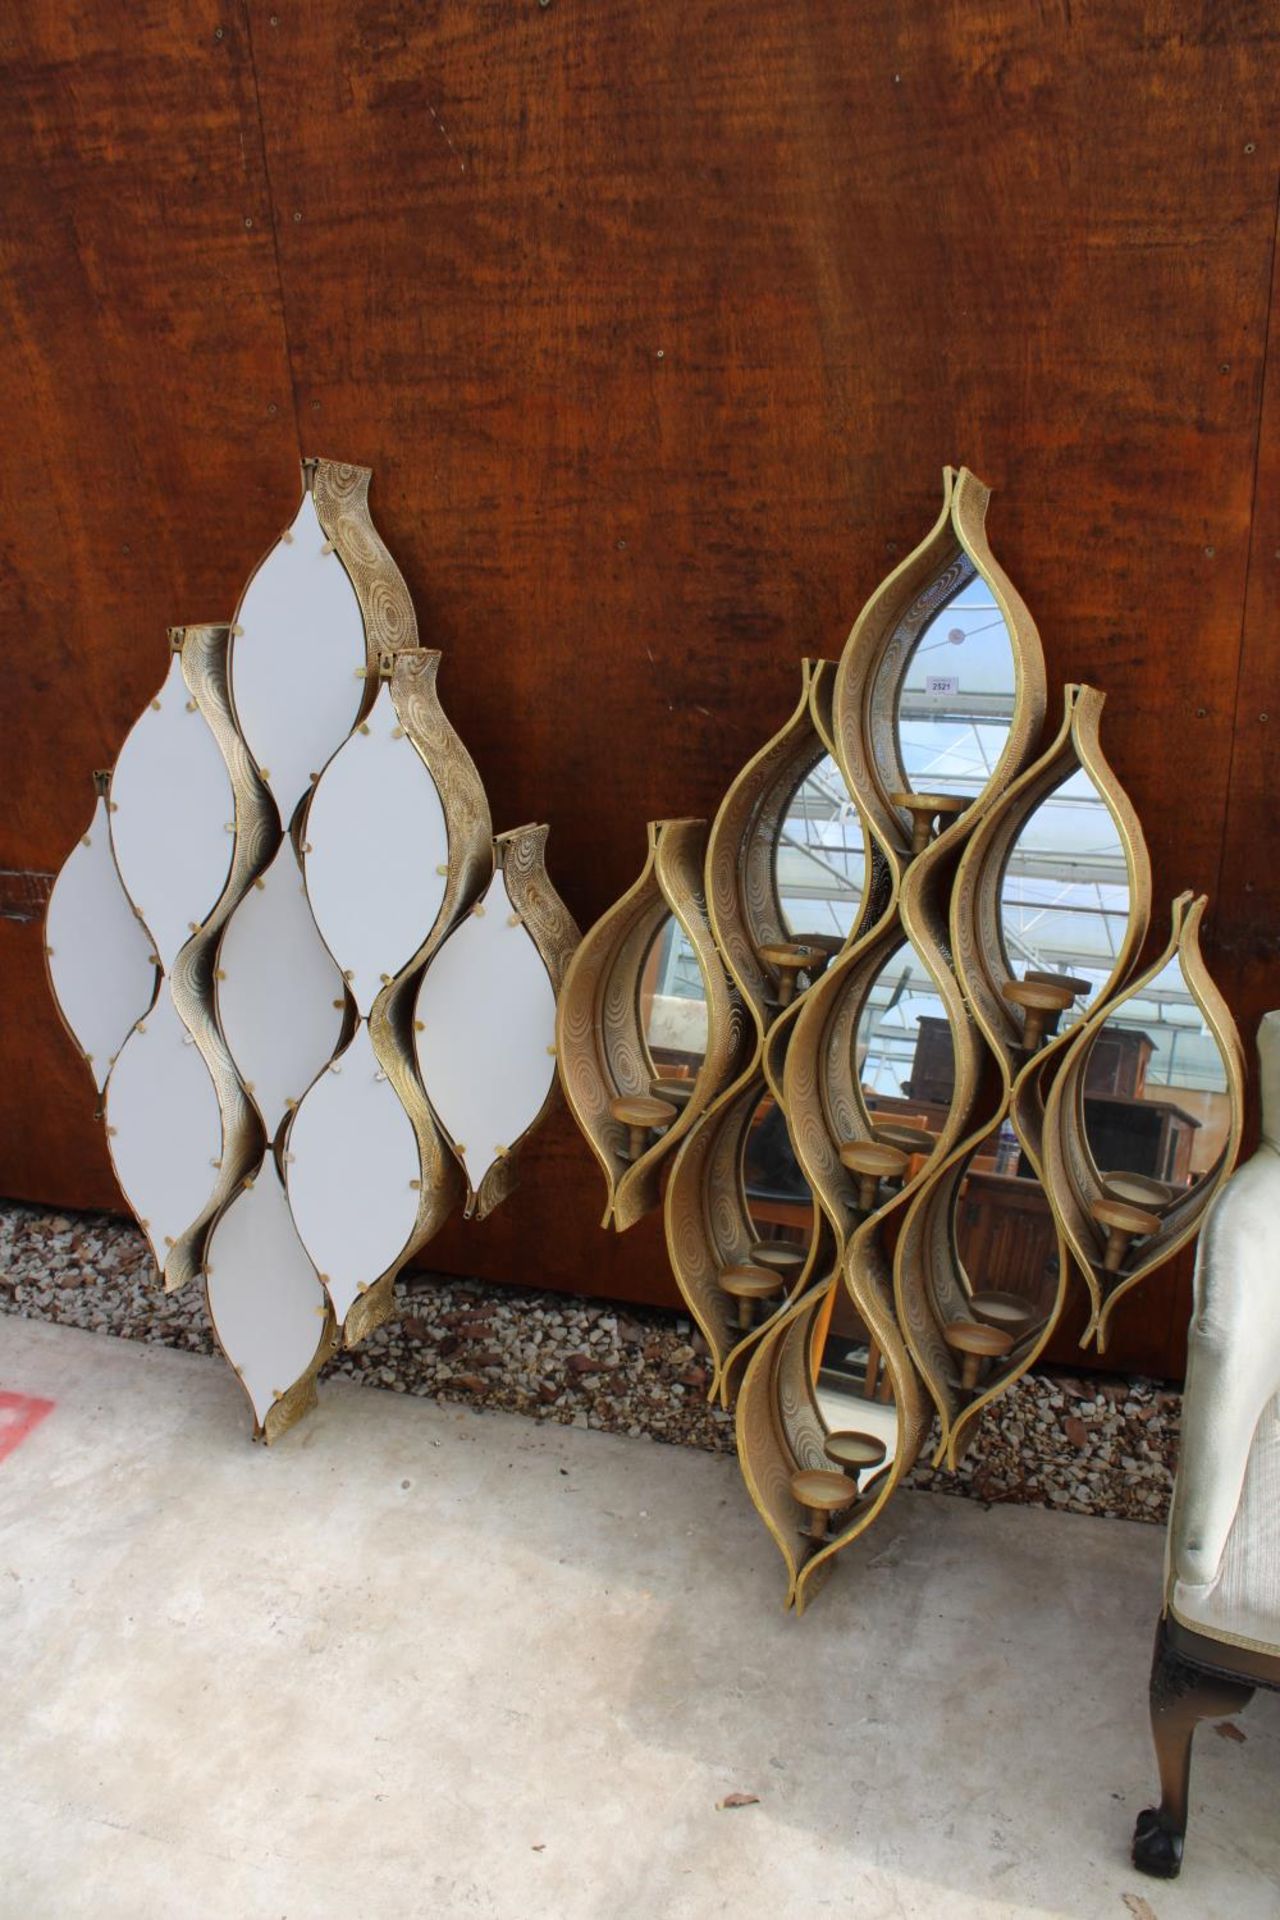 A PAIR OF MODERN PIERCED METALWARE MIRRORED RAINDROP MIRRORS WITH CANDLE HOLDERS - Image 5 of 5